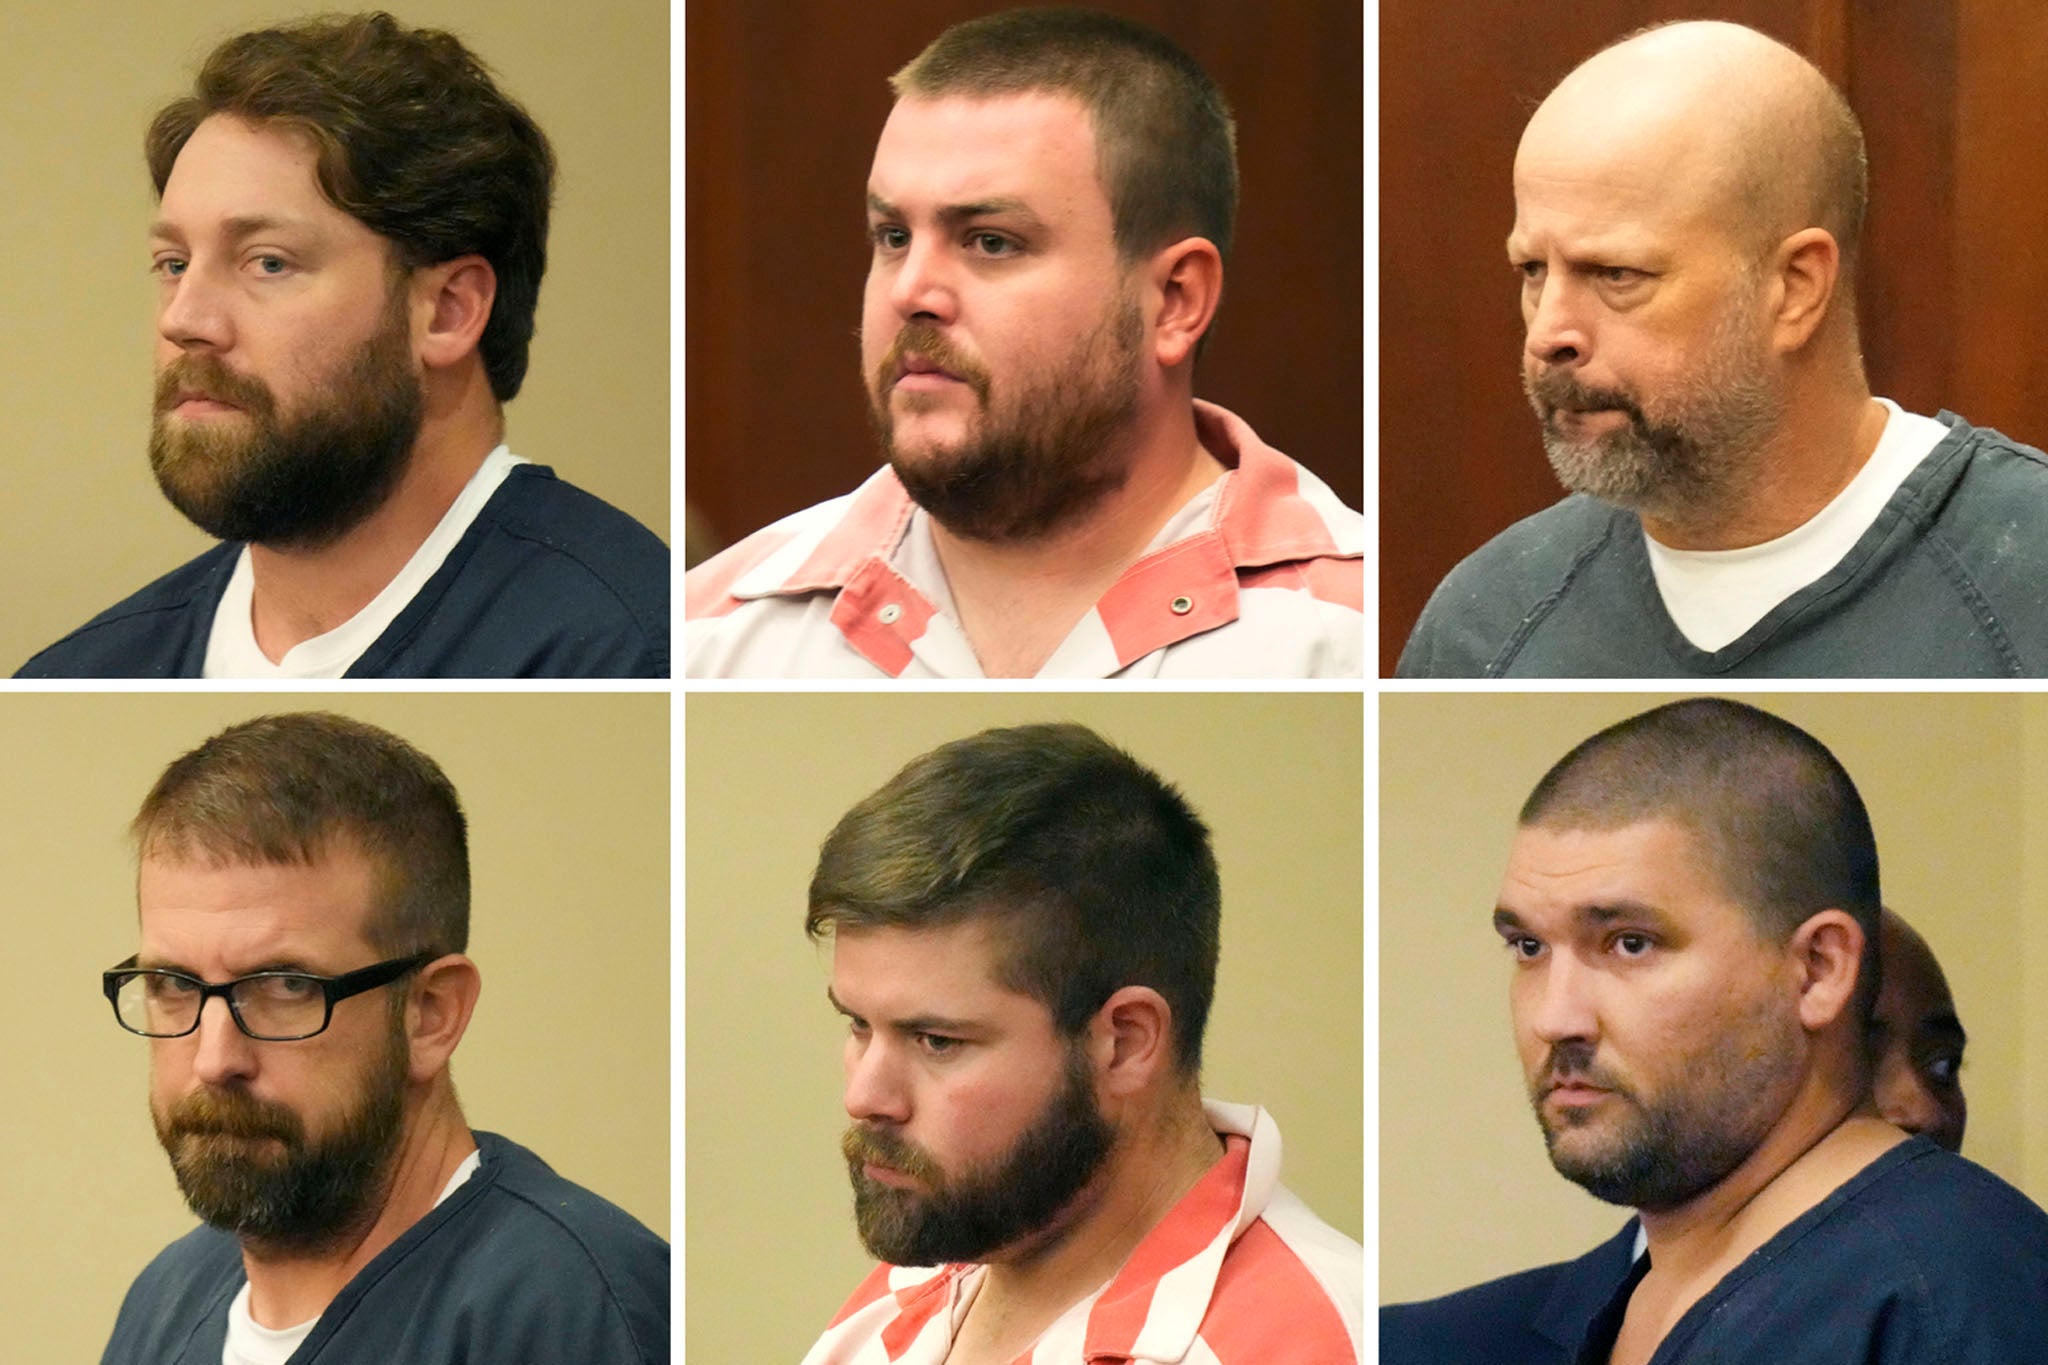 This combination of photos shows top row L-R former Rankin County sheriff’s deputies Hunter Elward, Christian Dedmon, Brett McAlpin and bottom row L-R Jeffrey Middleton, Daniel Opdyke and former Richland police officer Joshua Hartfield appearing at the Rankin County Circuit Court in Brandon, Mississippi on 14 August, 2023